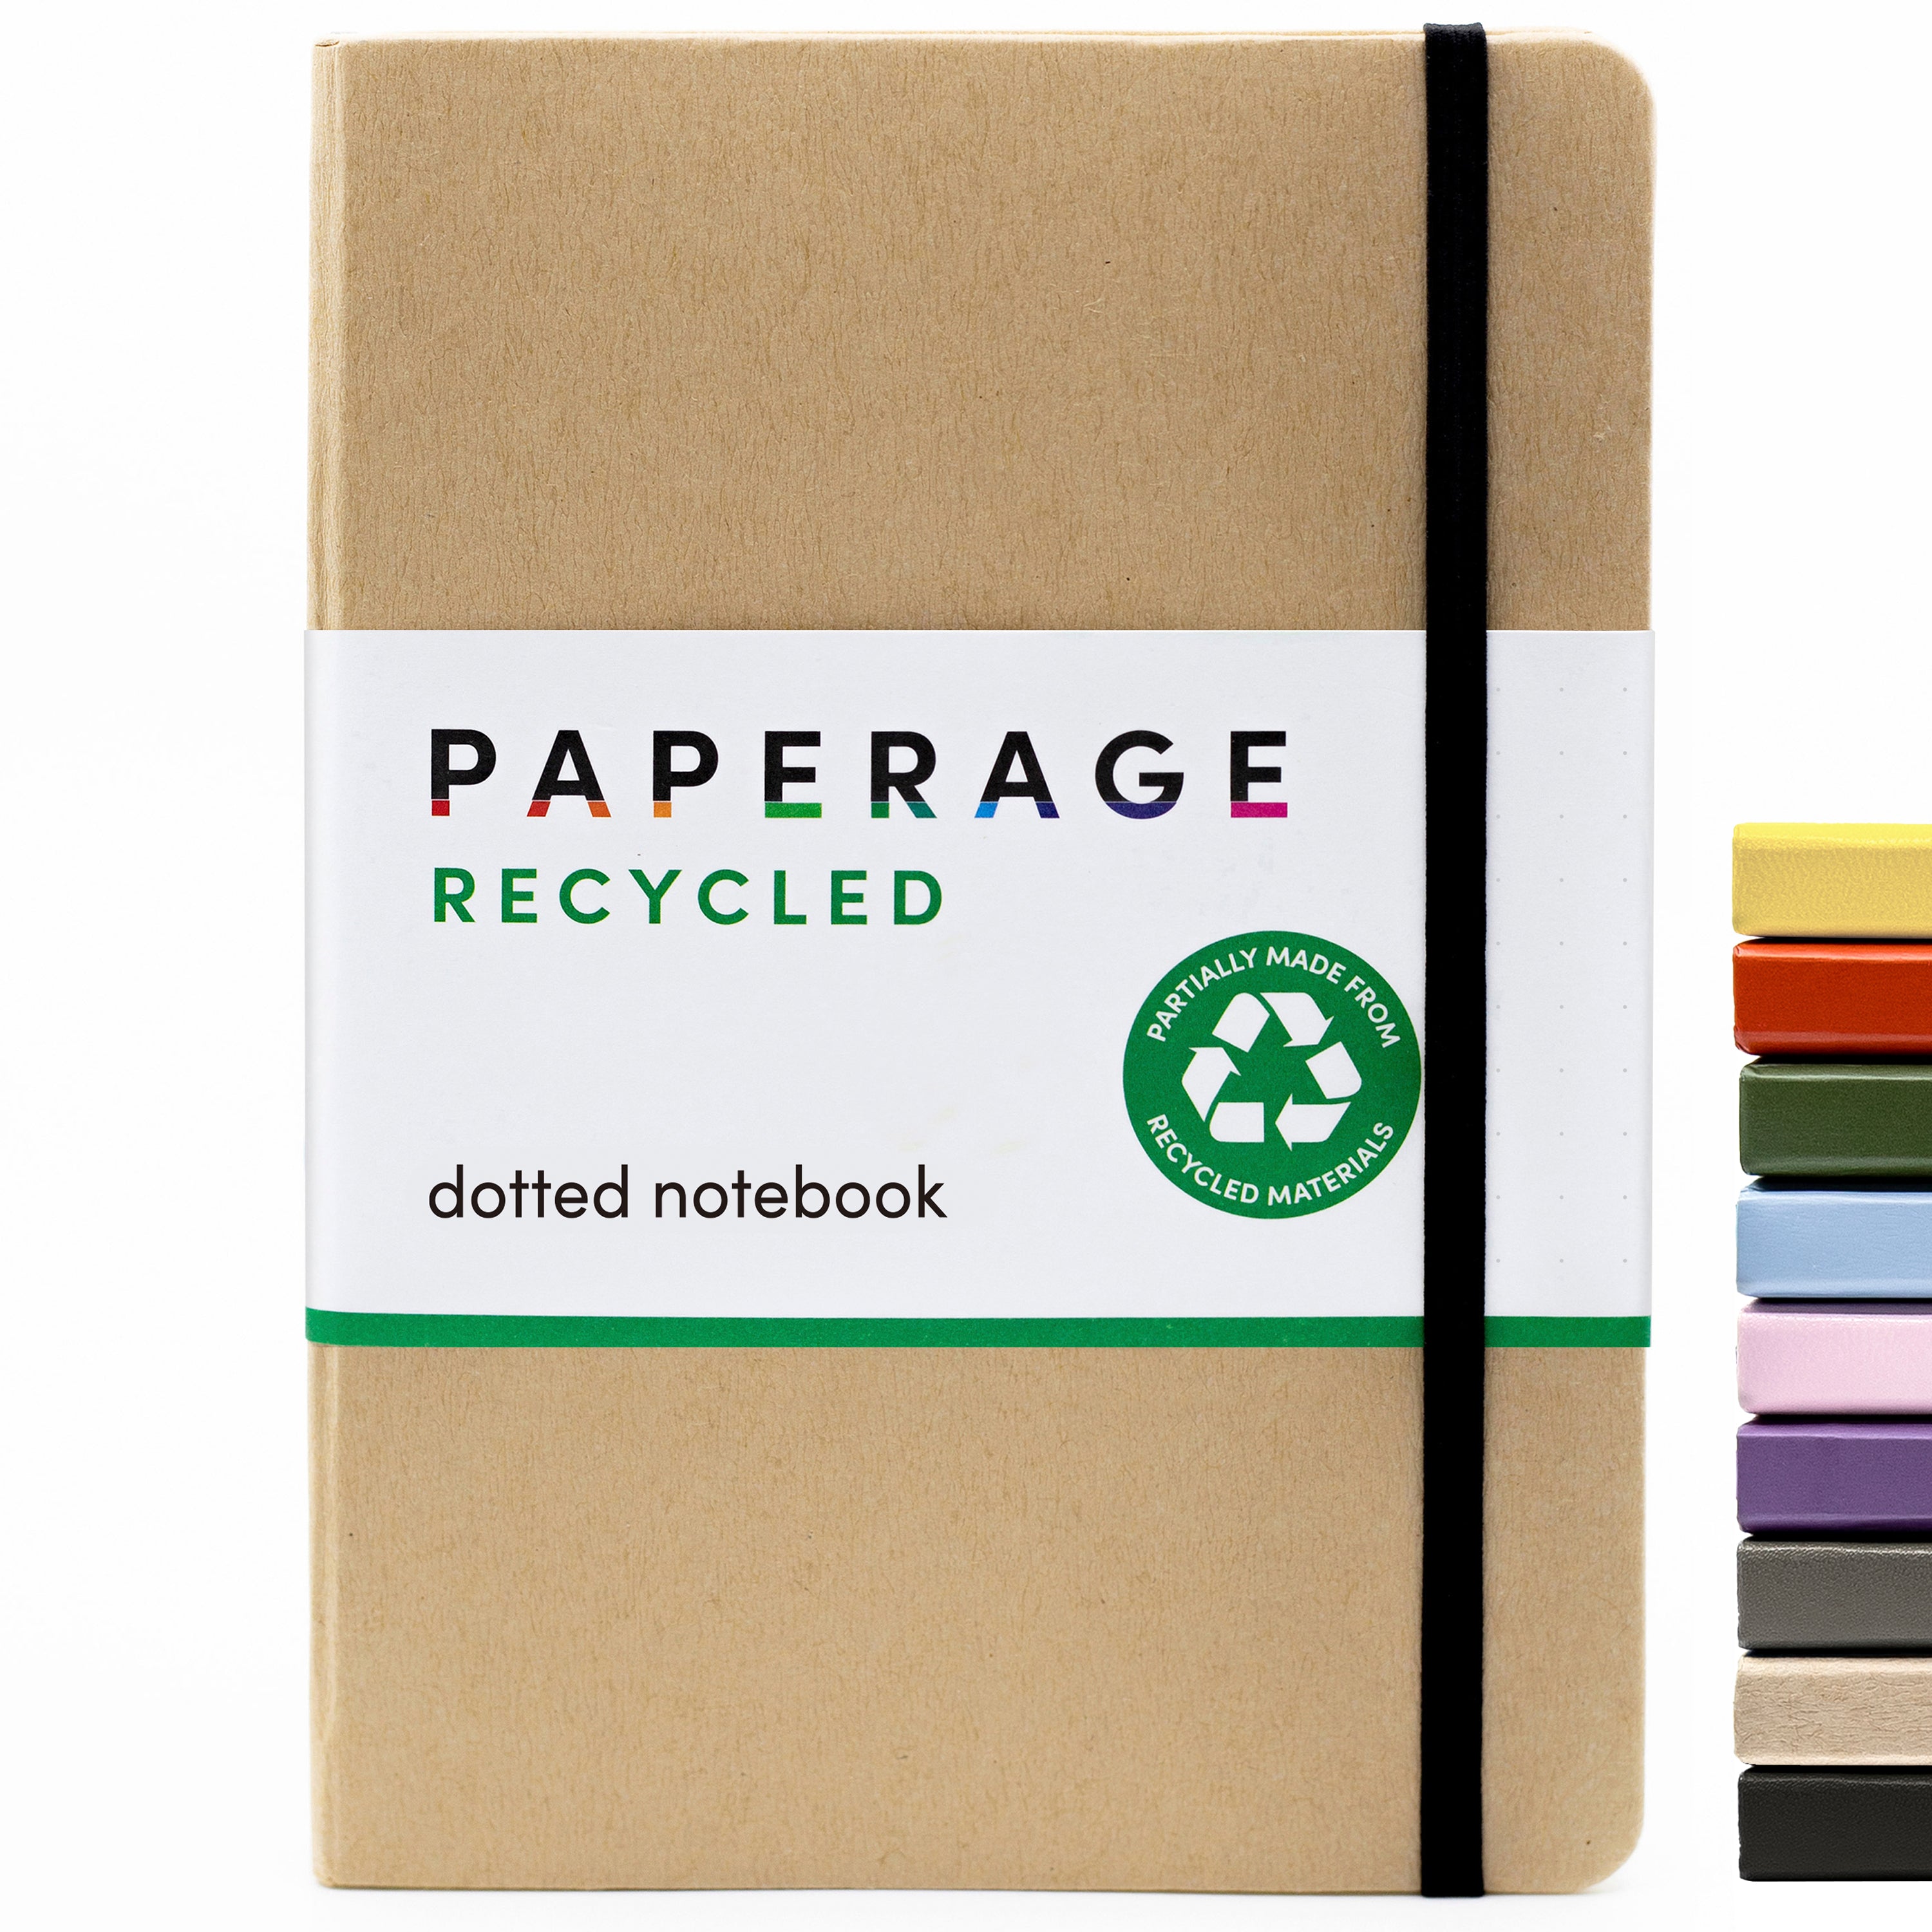 PAPERAGE Lined Journal Notebook, (Red), 160 Pages, Hardcover, 5.7” x 8” 